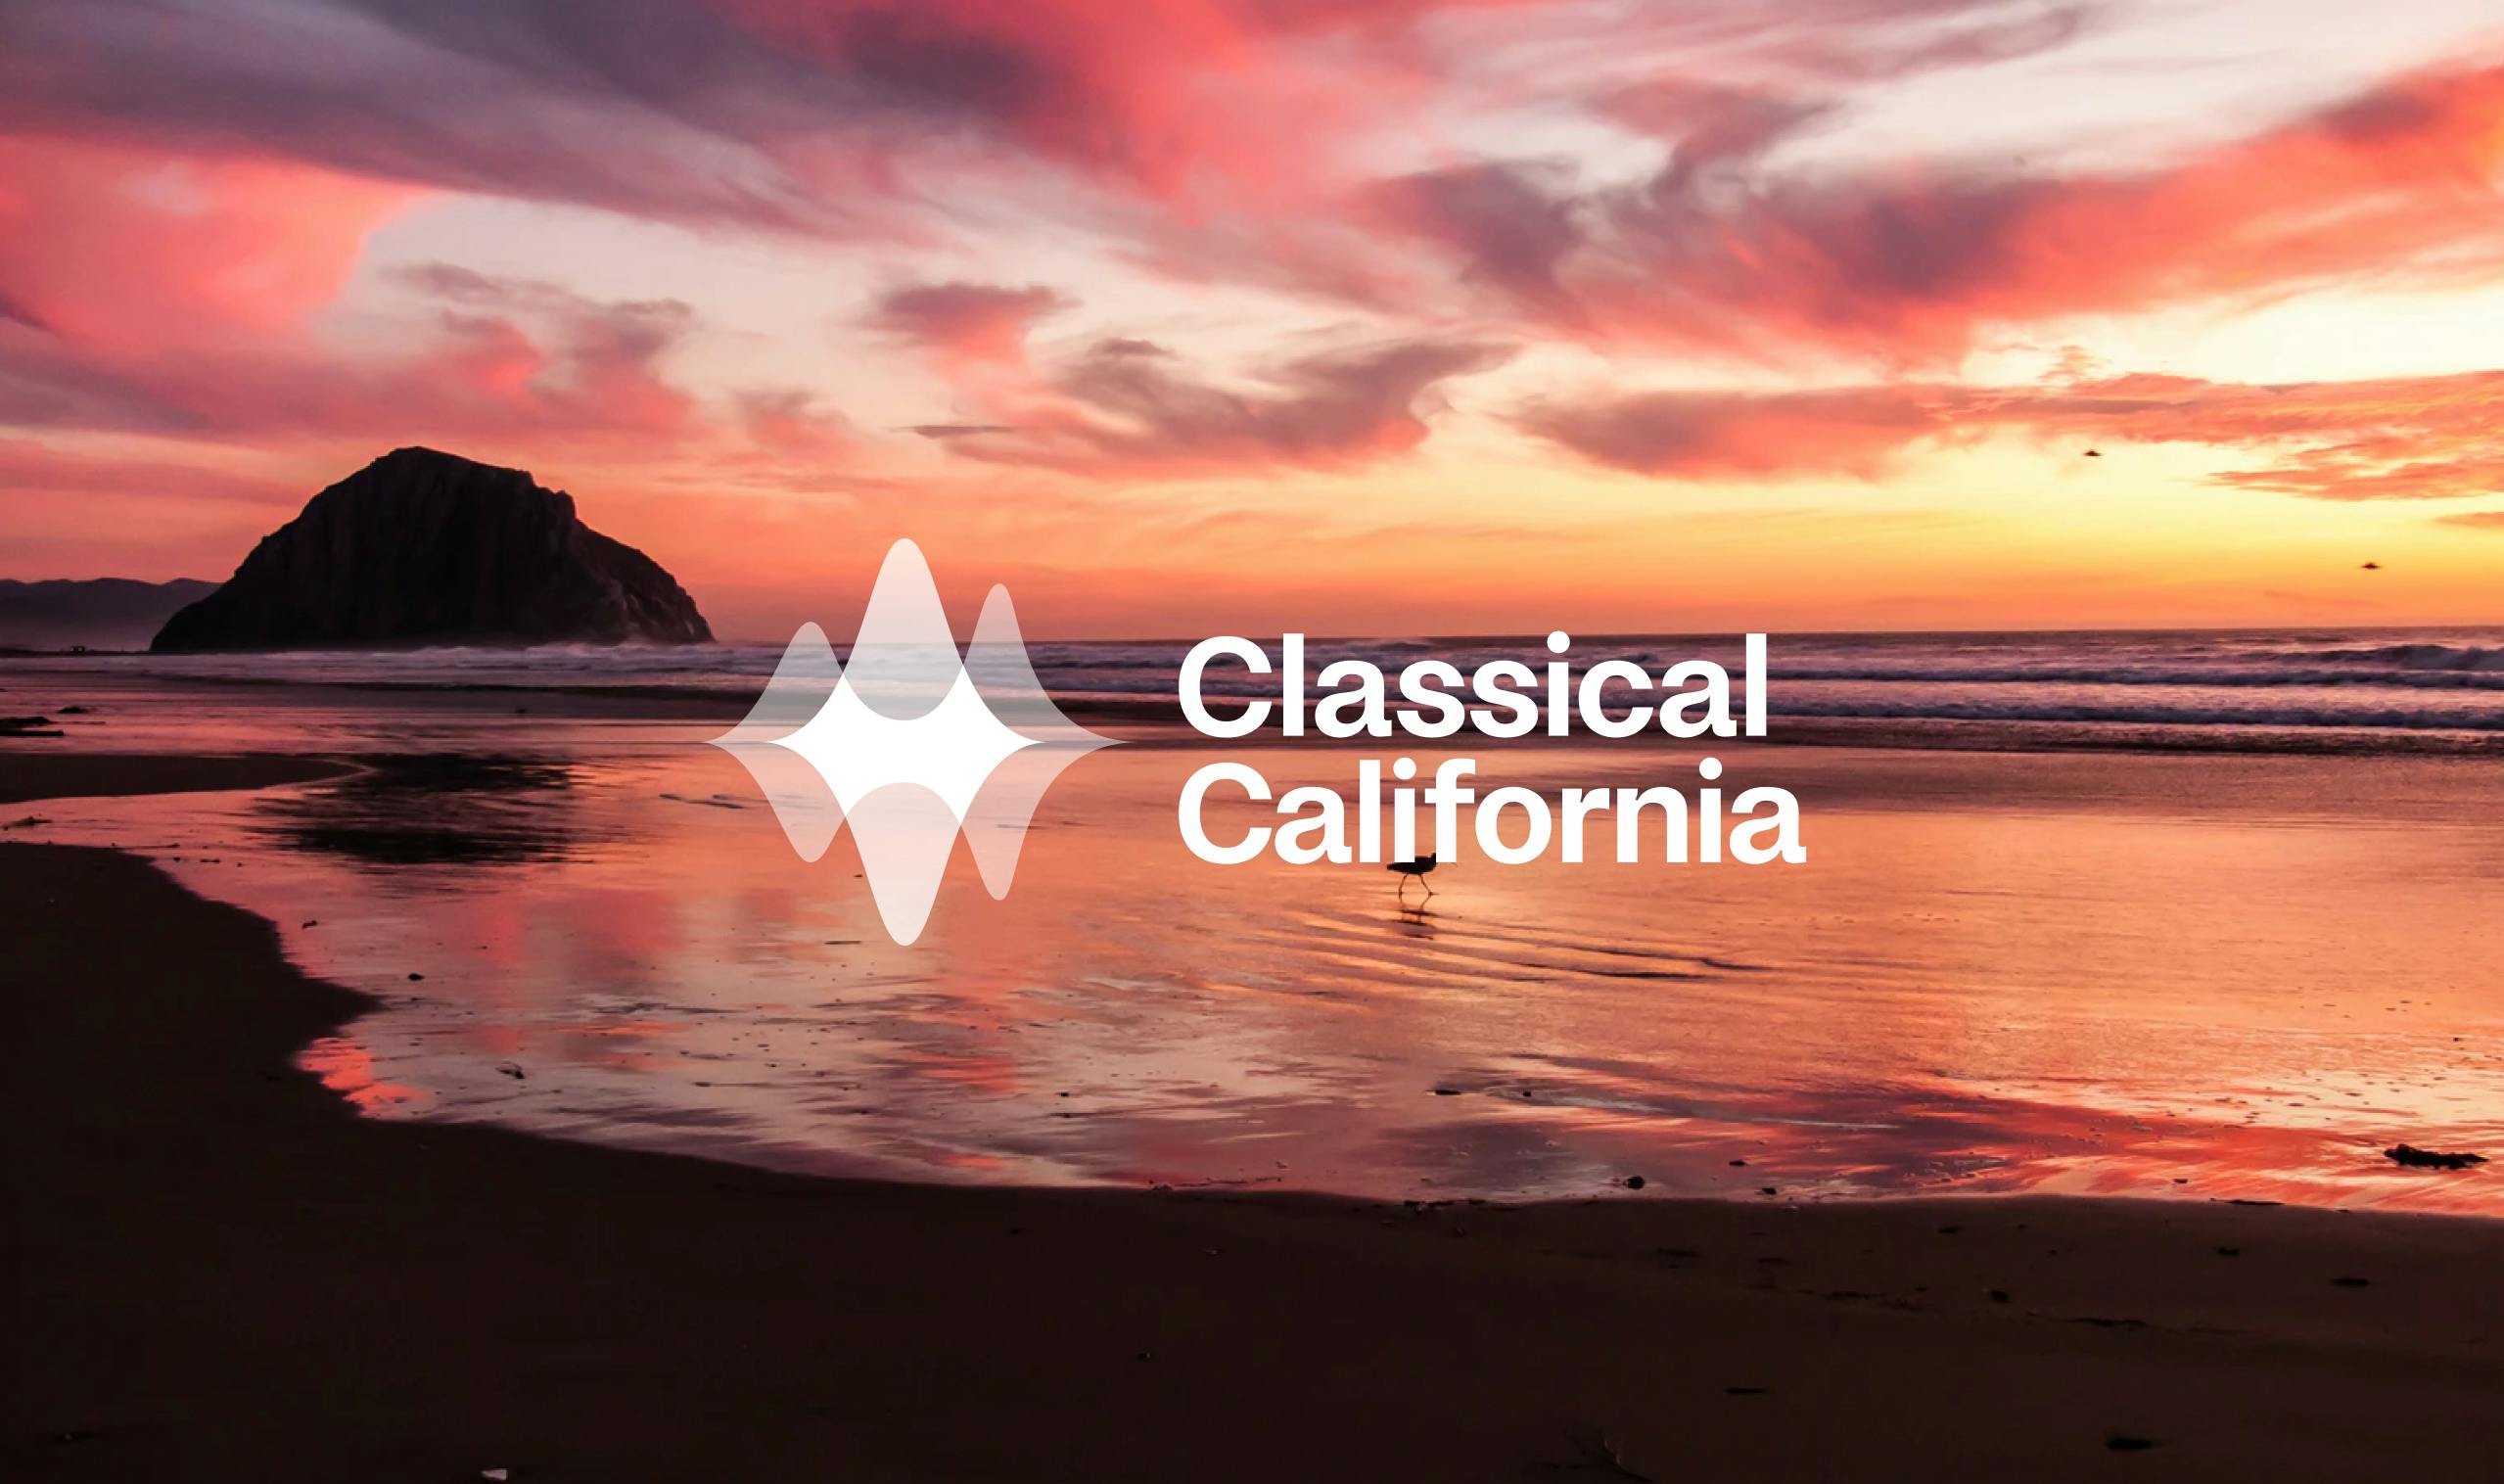 Classical California logo design with sunset background image glowing light on the ocean shore